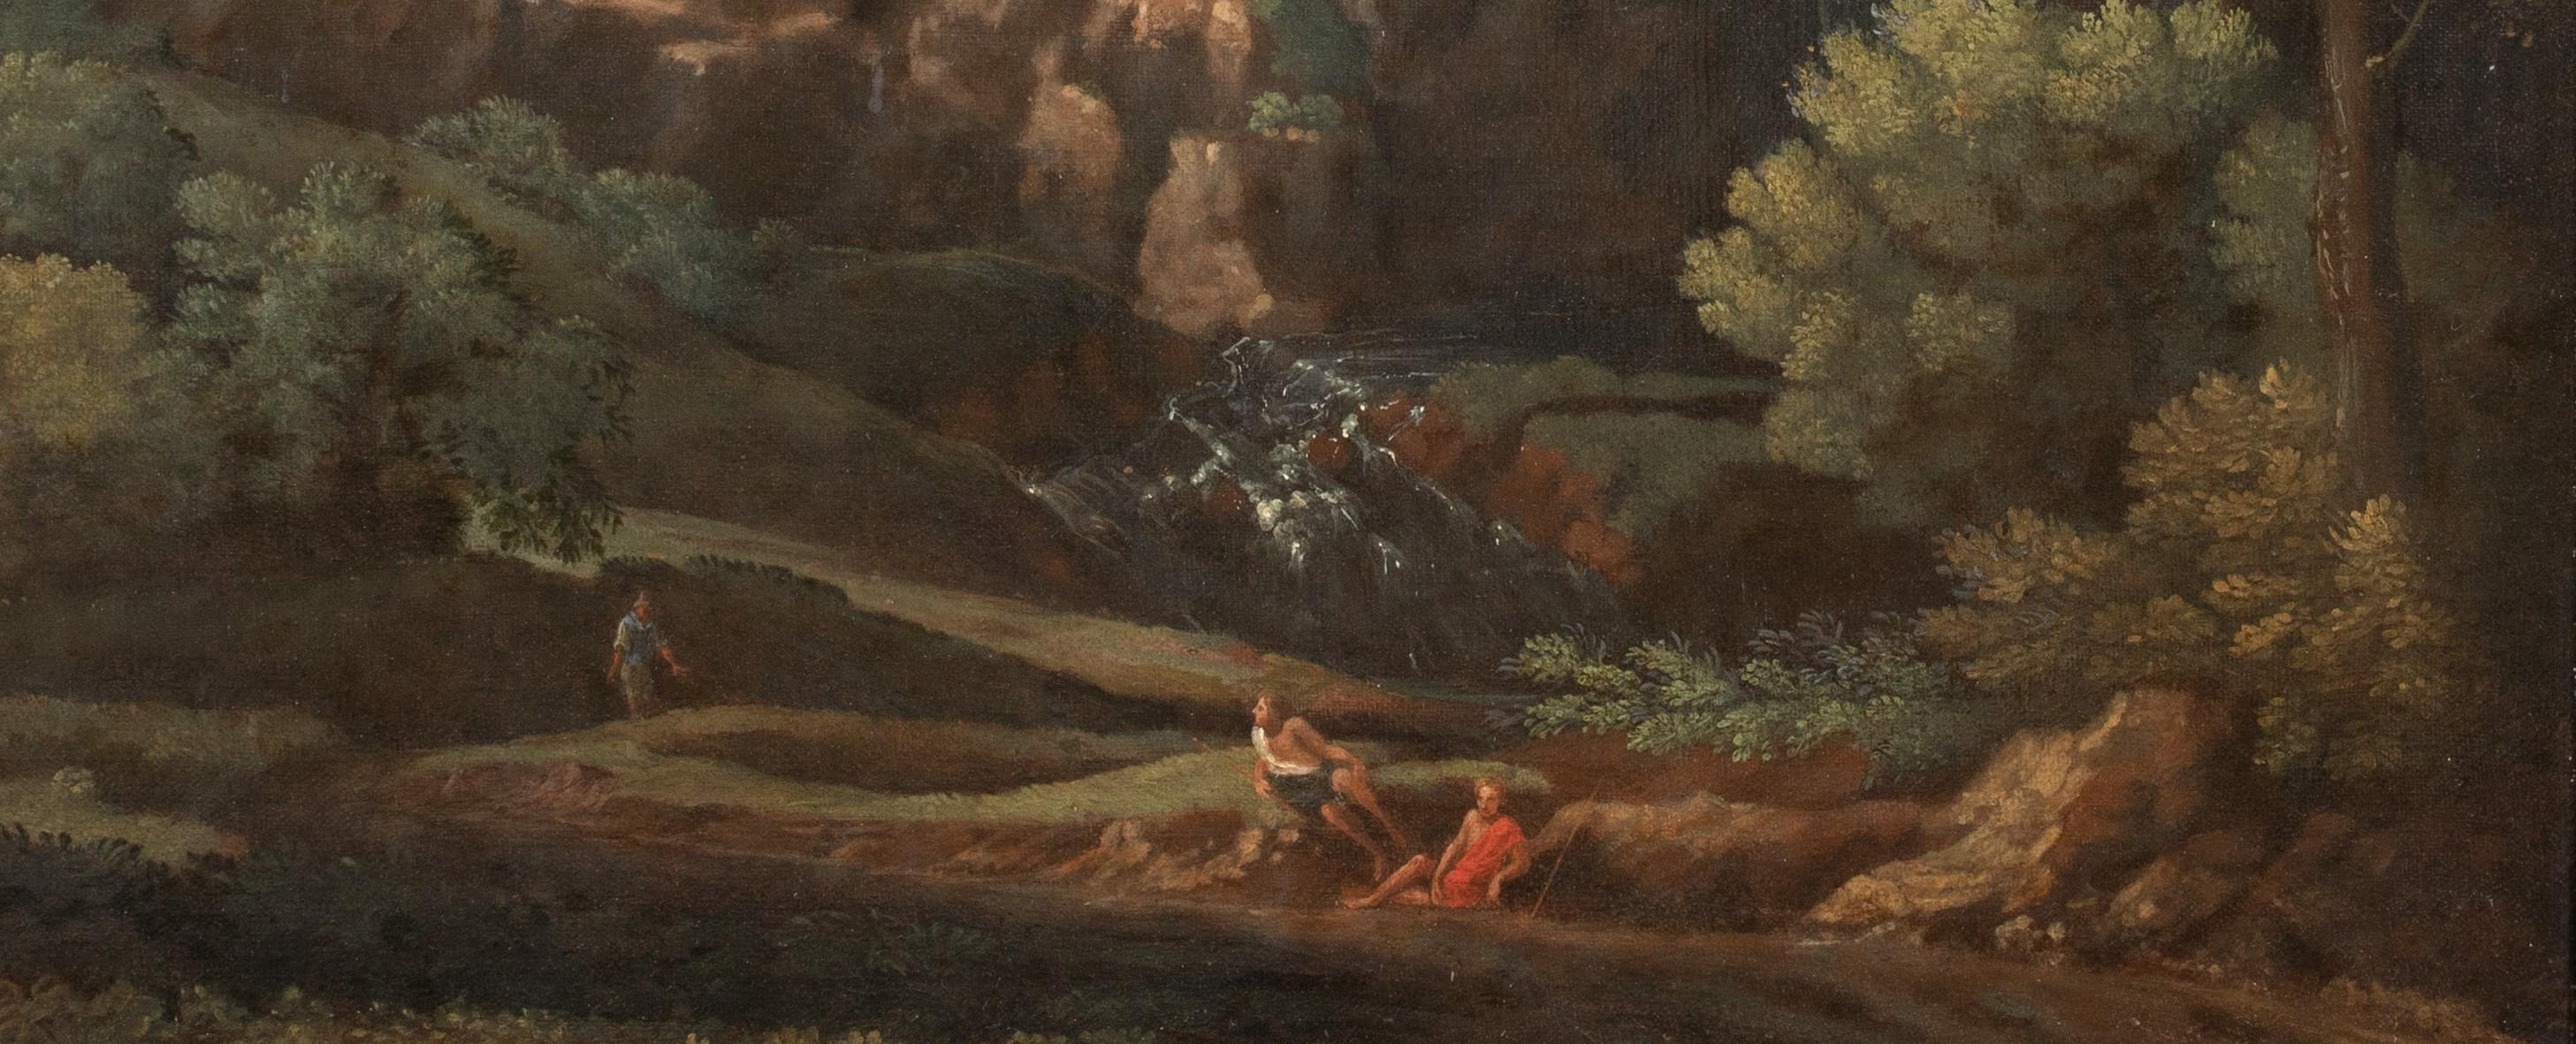 Figures In A Waterfall Landscape, 17th Century

Workshop of Nicolas Poussin (French, 1594-1665)

Large 17th Century Italian Old Master view of figures in a classical landscape with a waterfall beyond, oil on canvas. Godo original condition typical